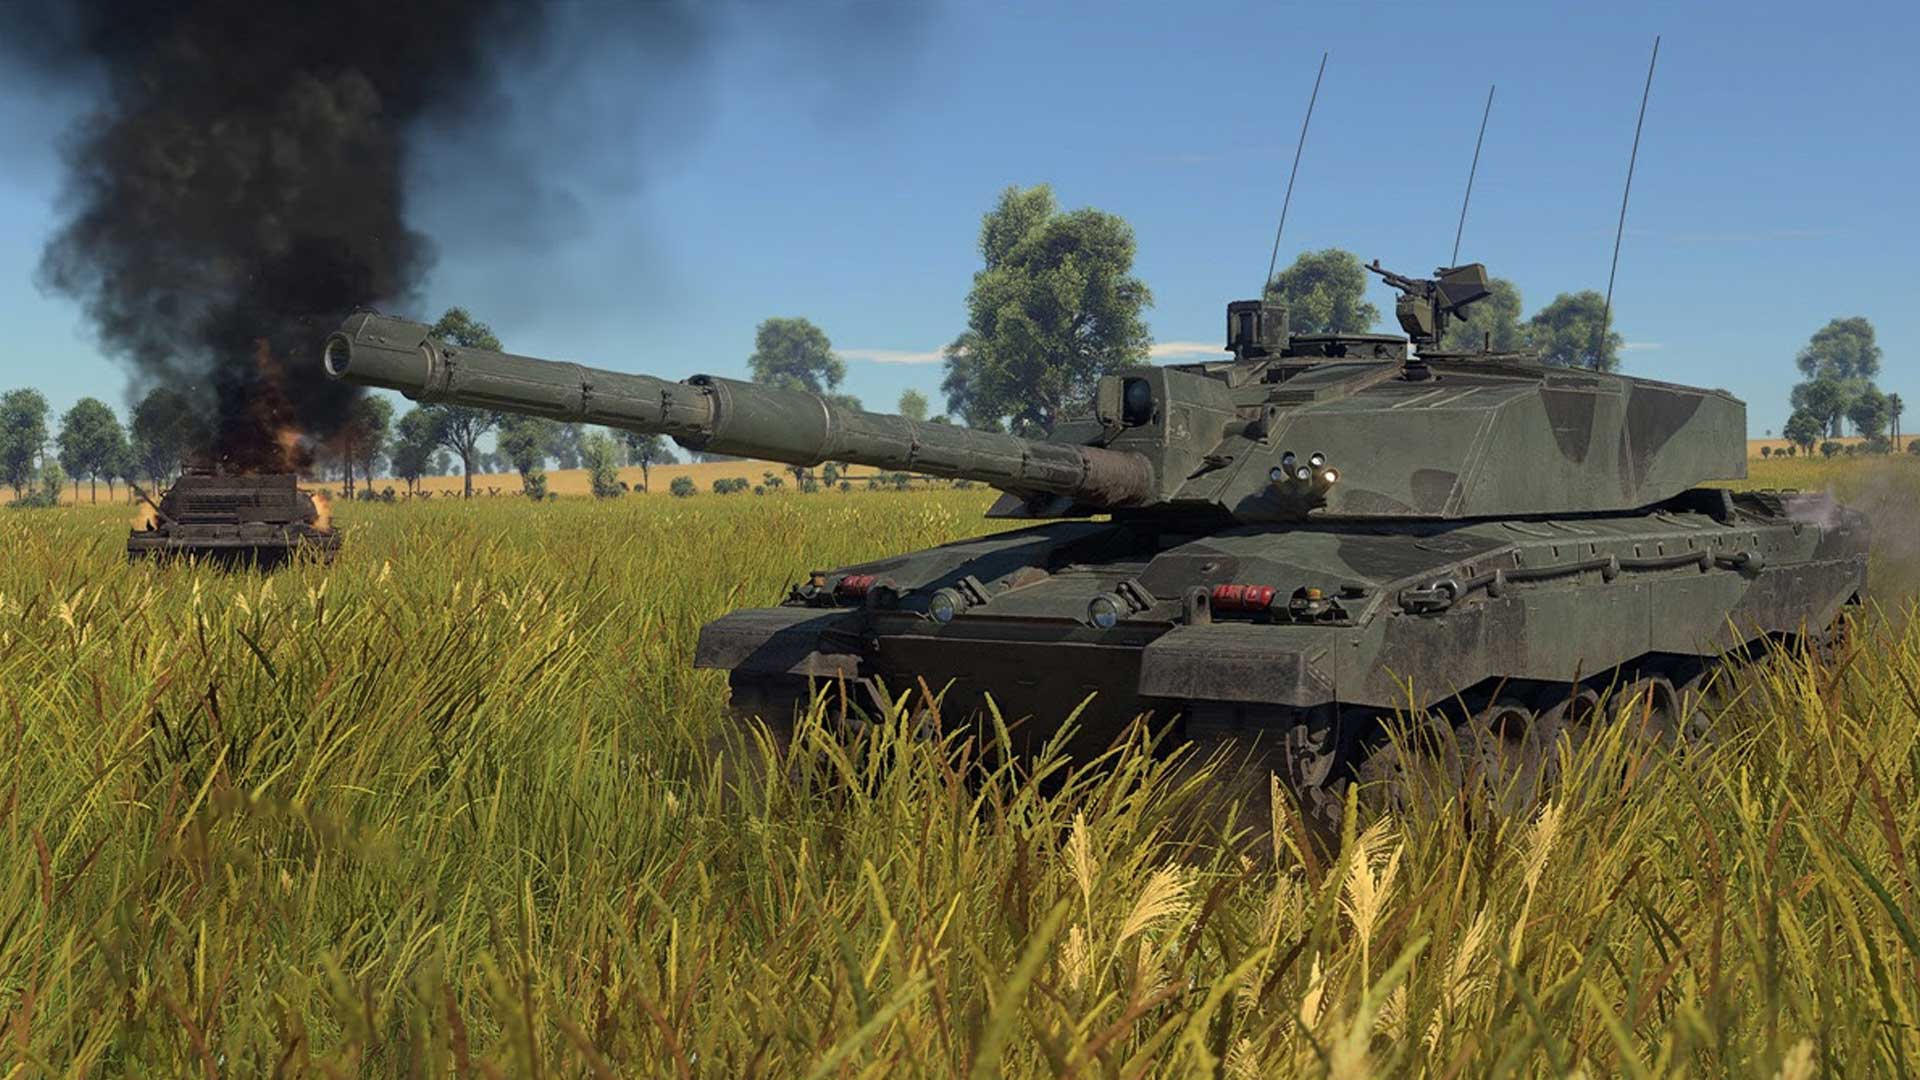 A tank sits ominously in the foreground, as an enemy tank smolder in the background 